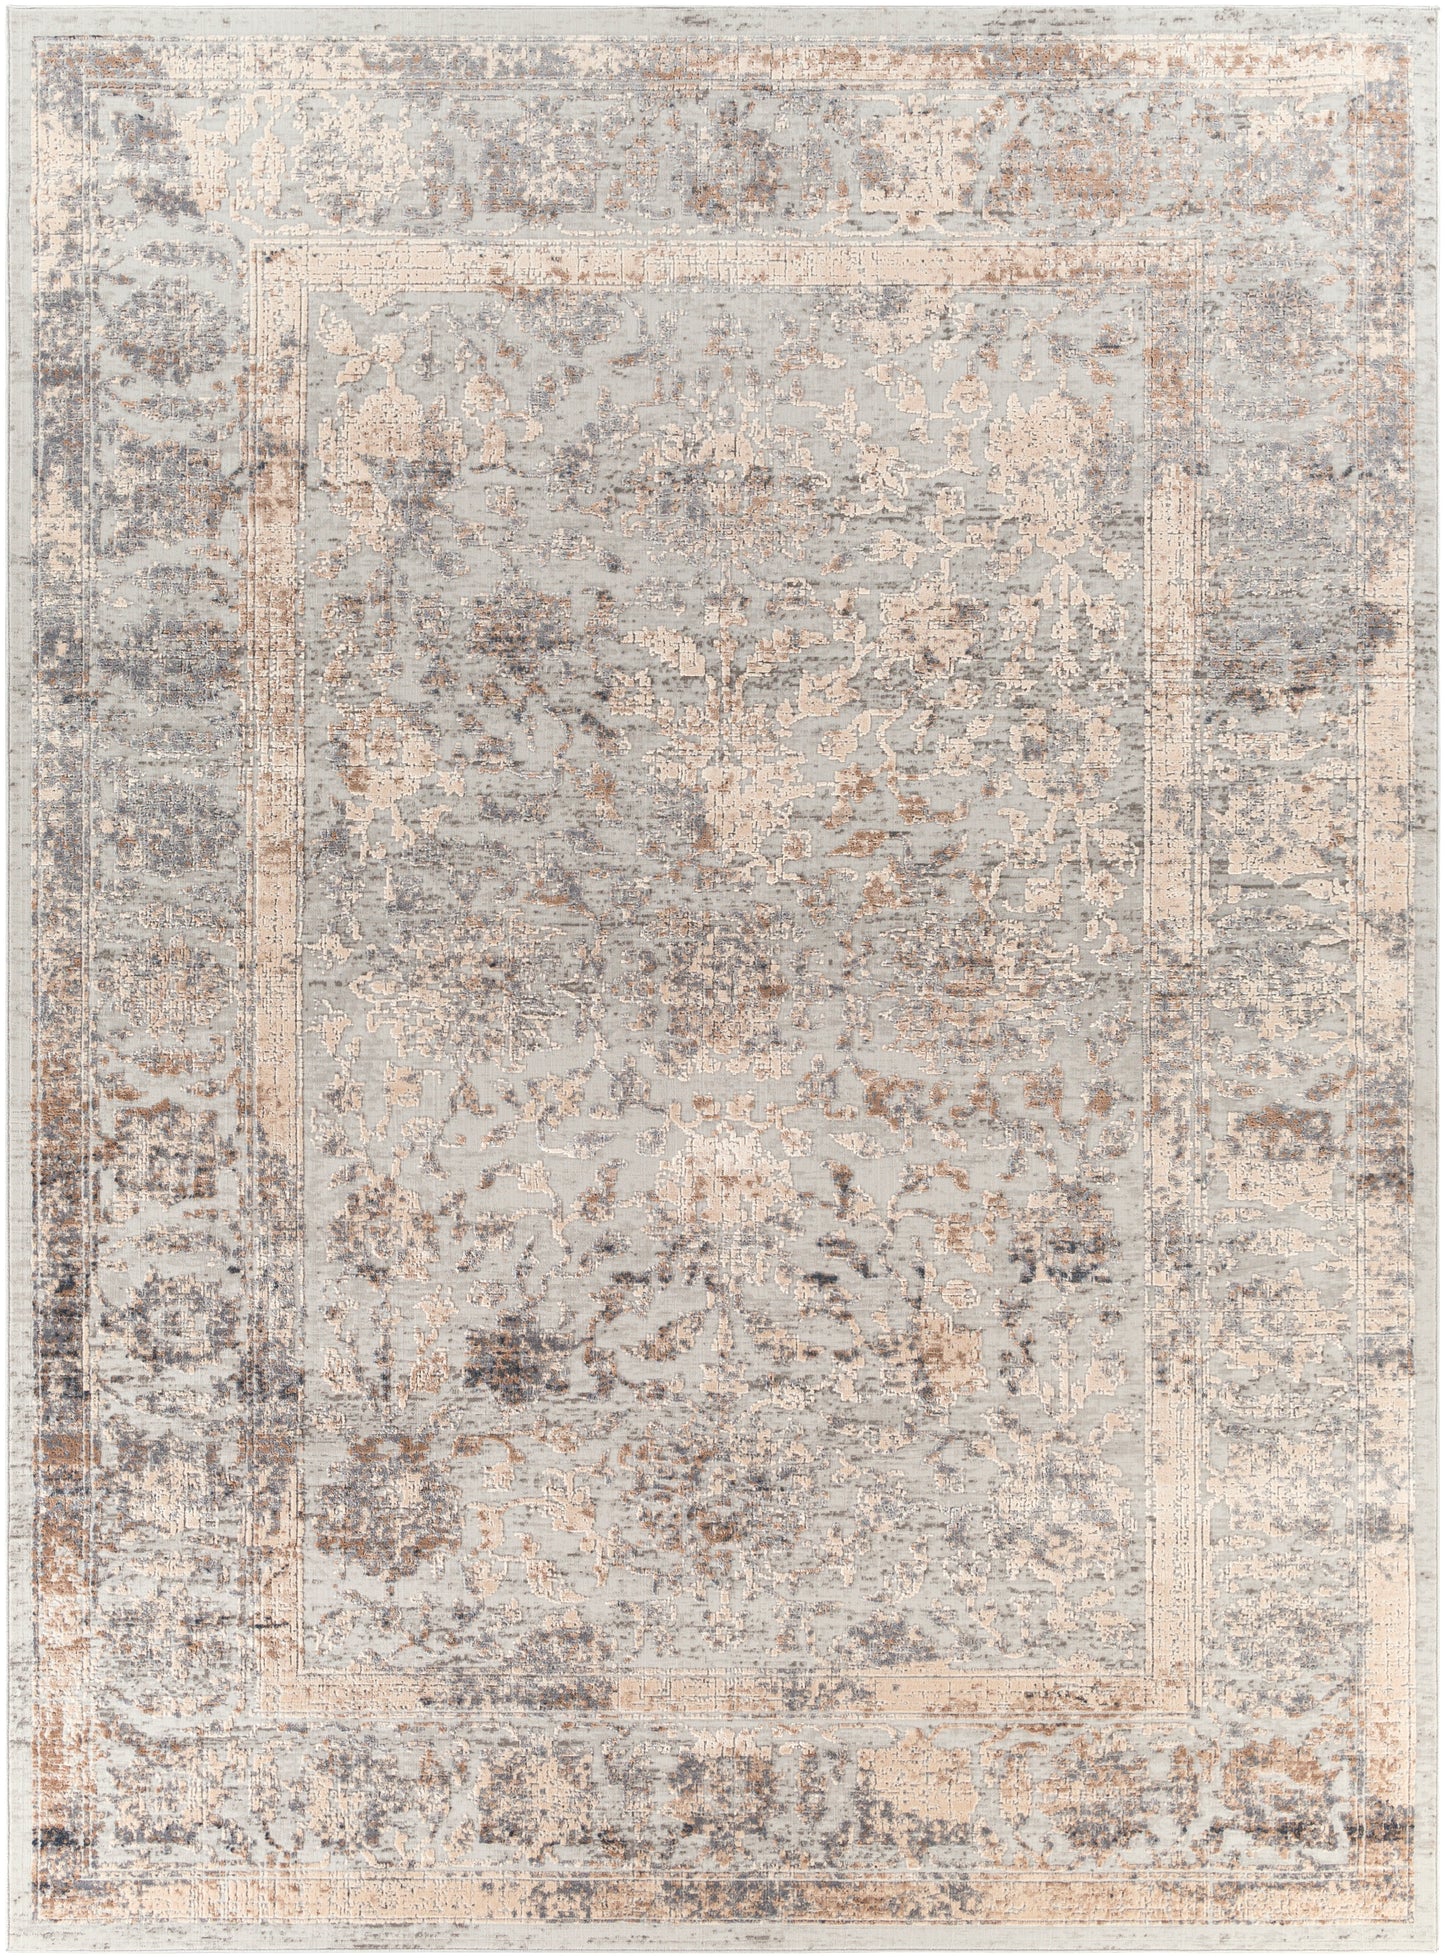 Alpine 23058 Machine Woven Synthetic Blend Indoor Area Rug by Surya Rugs